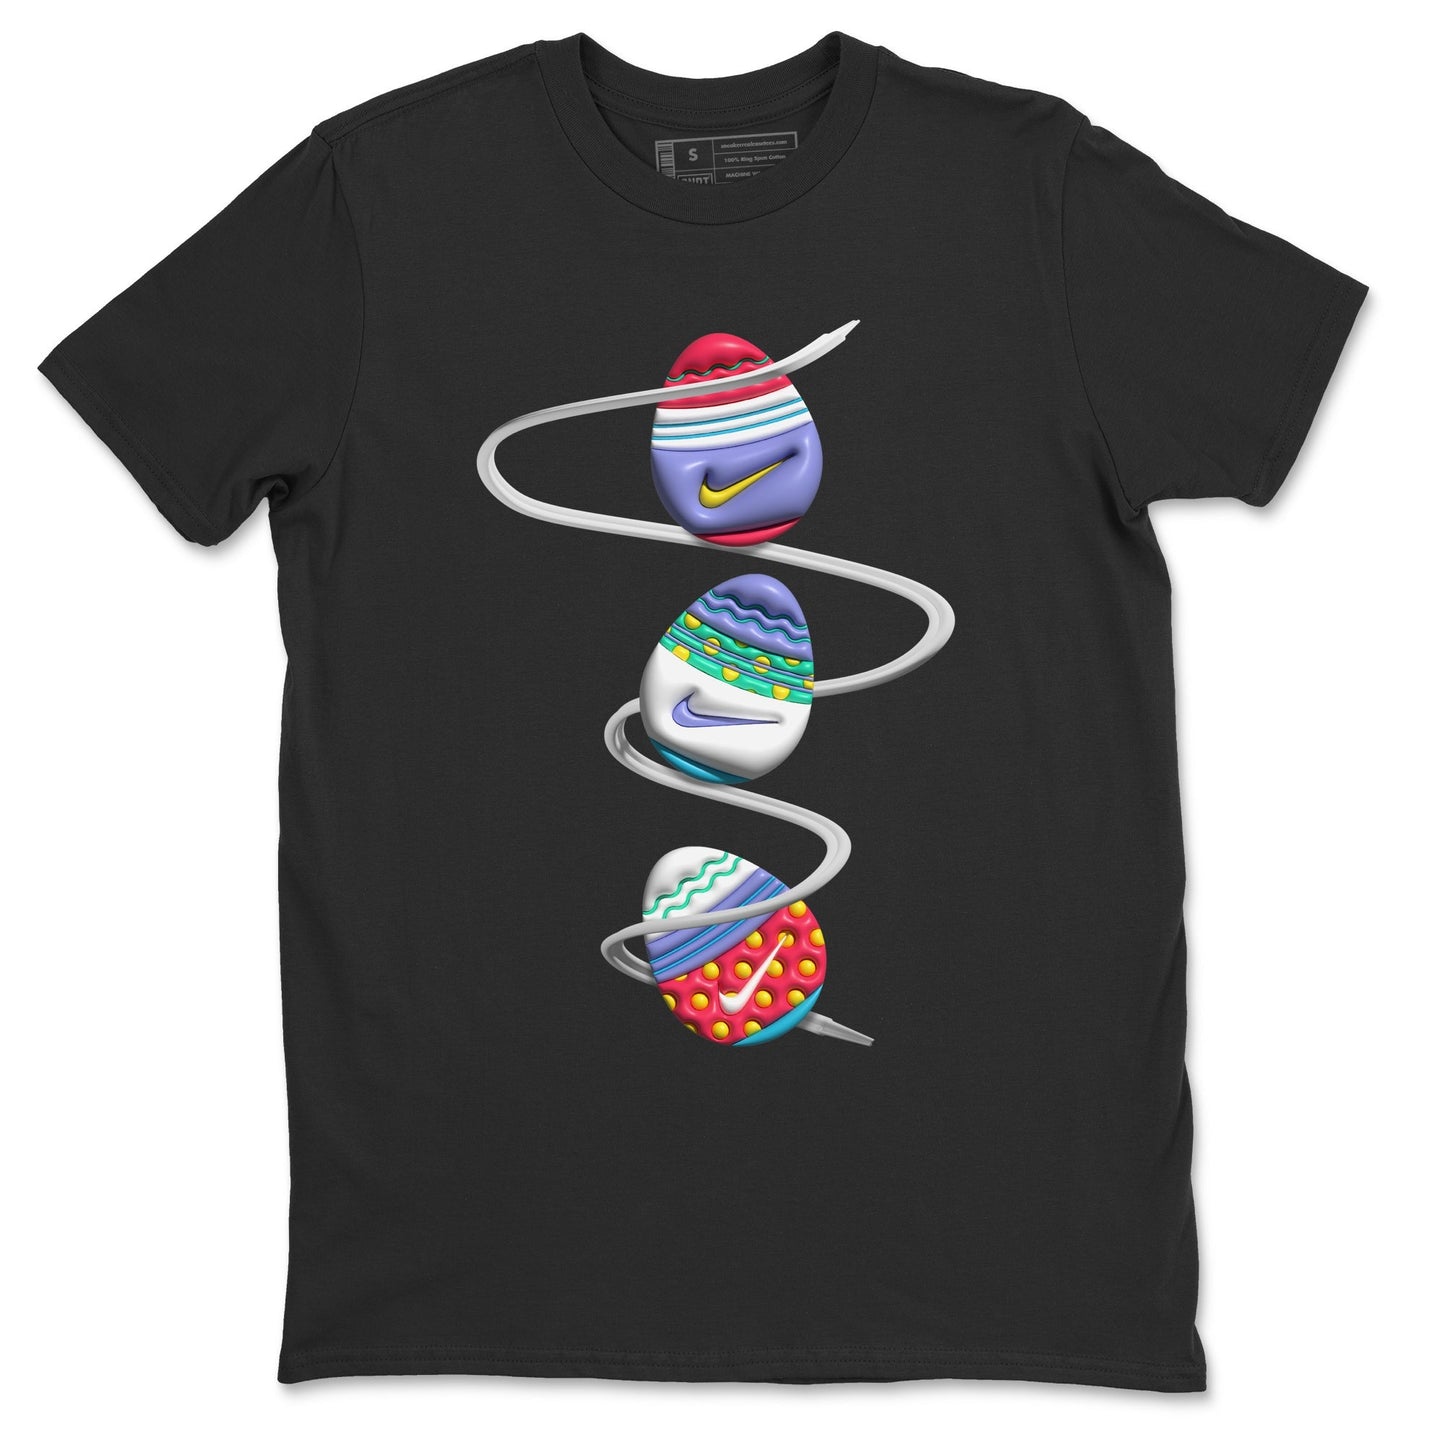 Dunk Easter Candy Sneaker Tees Drip Gear Zone 3D Easter Eggs Sneaker Tees Nike Easter Shirt Unisex Shirts Black 2